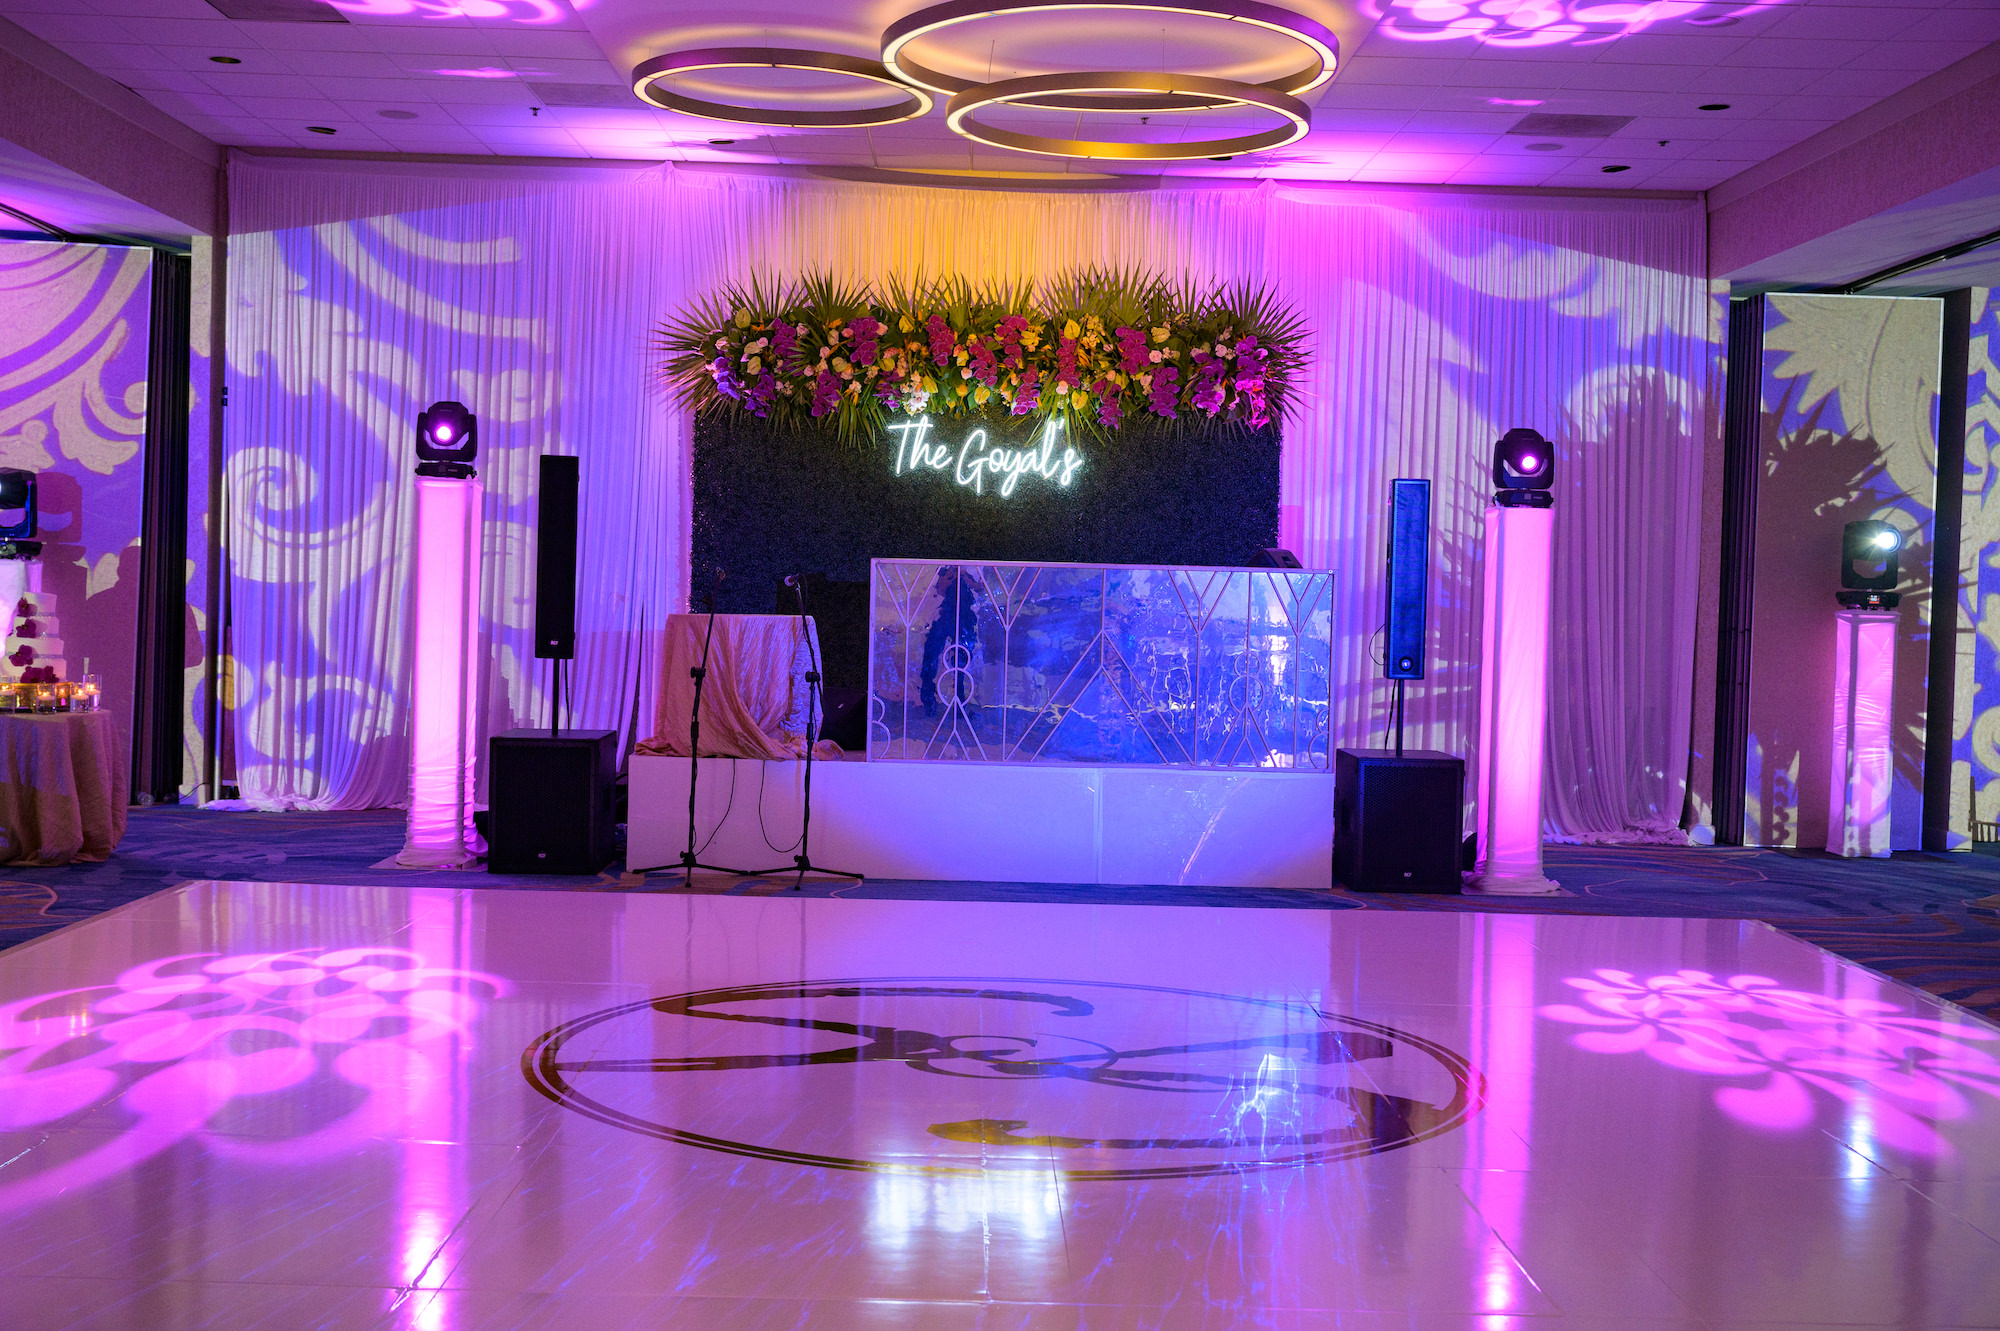 Wedding Reception and Decor, Purple Uplighting White Dance Floor with Gold Monogram, Sweetheart Table on Stage with Gold Linens, Boxwood Greenery Backdrop Wall with Custom Neon Sign, Tropical Florals with Fuchsia, Bright pink, Orange, Purple and Green | Tampa Bay Wedding Venue Hilton Clearwater Beach Resort and Spa | Gabro Event Rentals